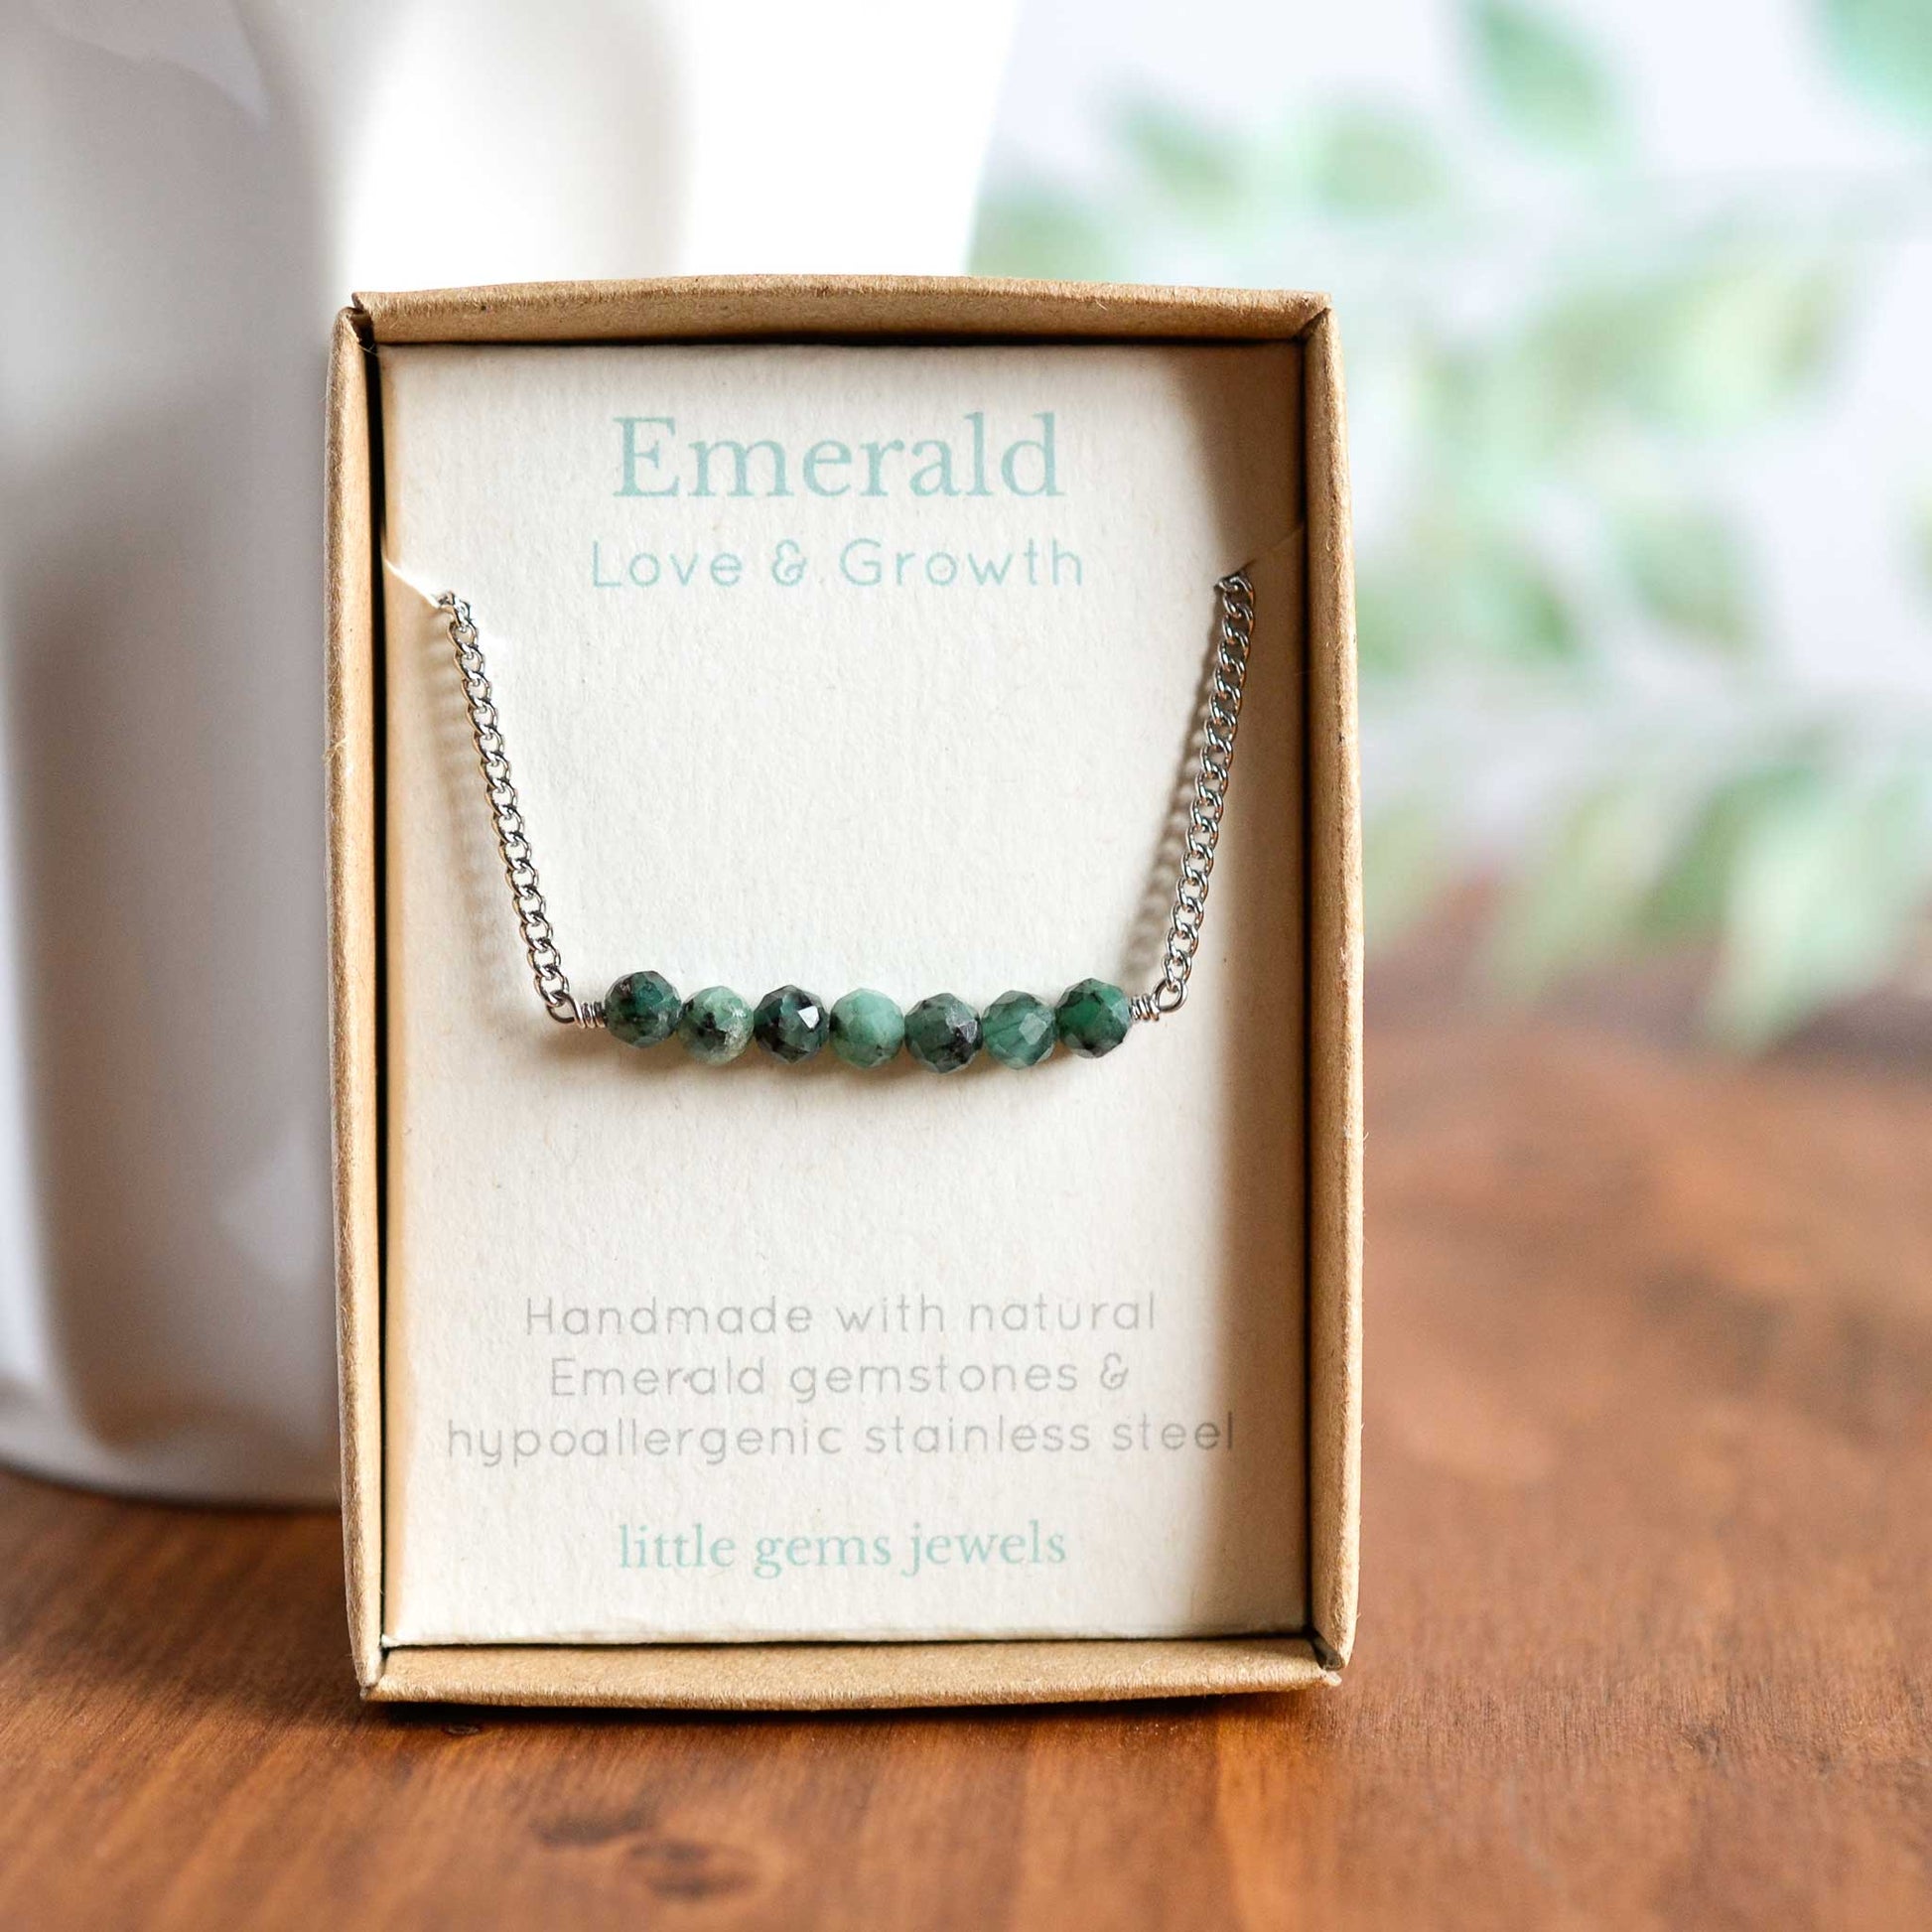 Dainty Emerald necklace in eco friendly gift box